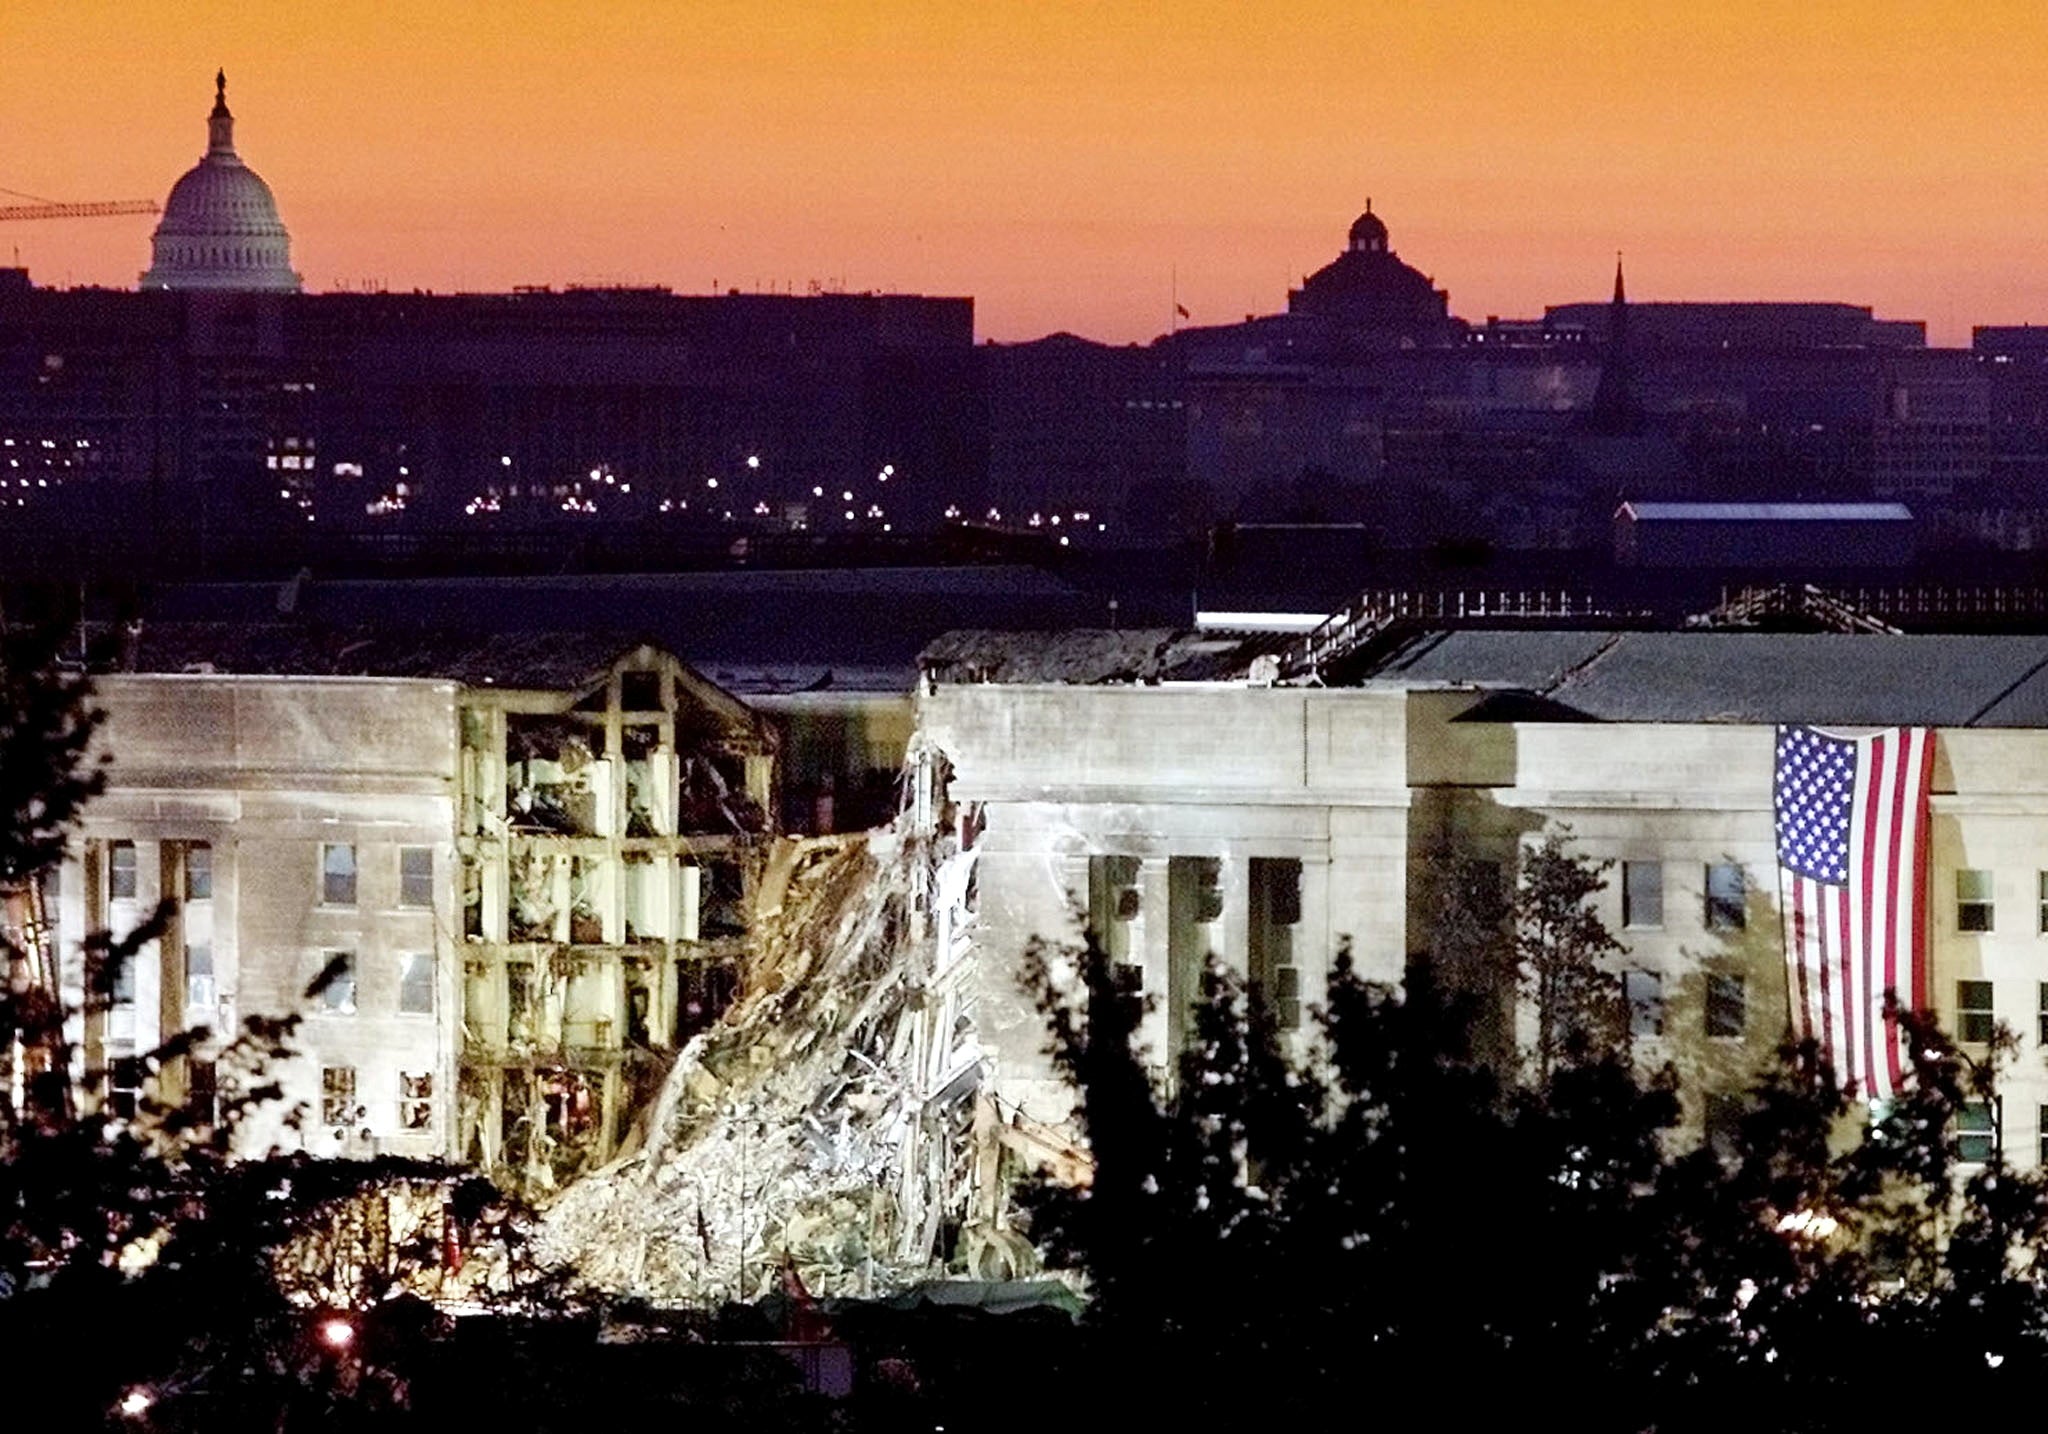 The damaged area of the Pentagon building